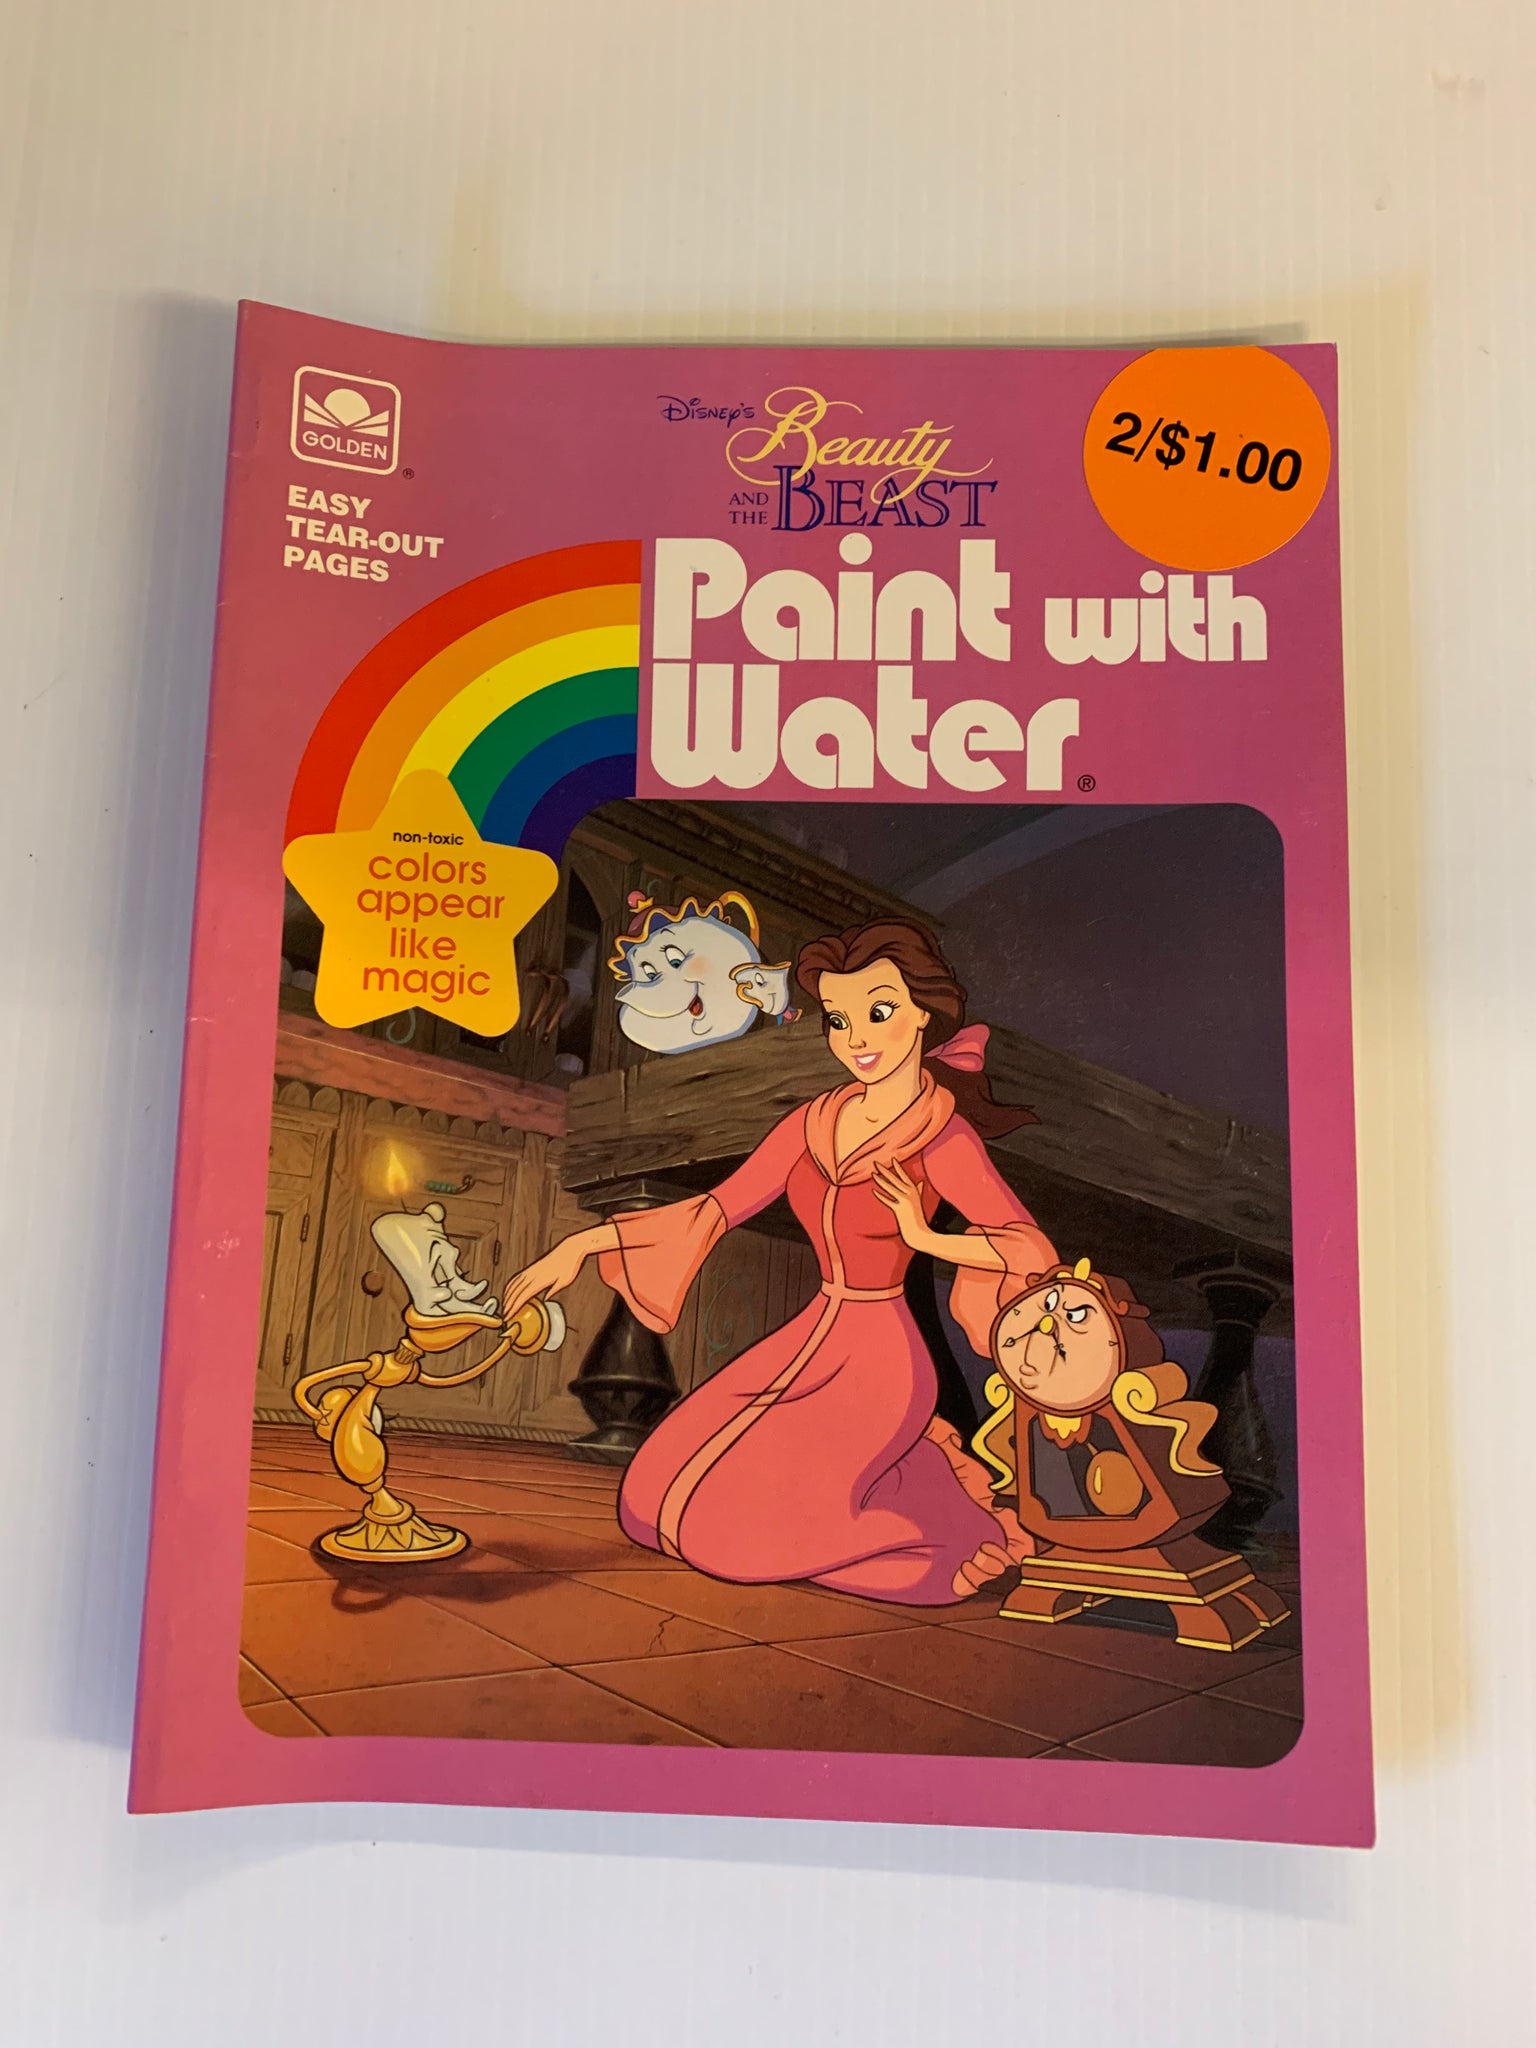 Vintage 1993 Golden Books Disney Beauty and the Beast Paint with Water Activity Book